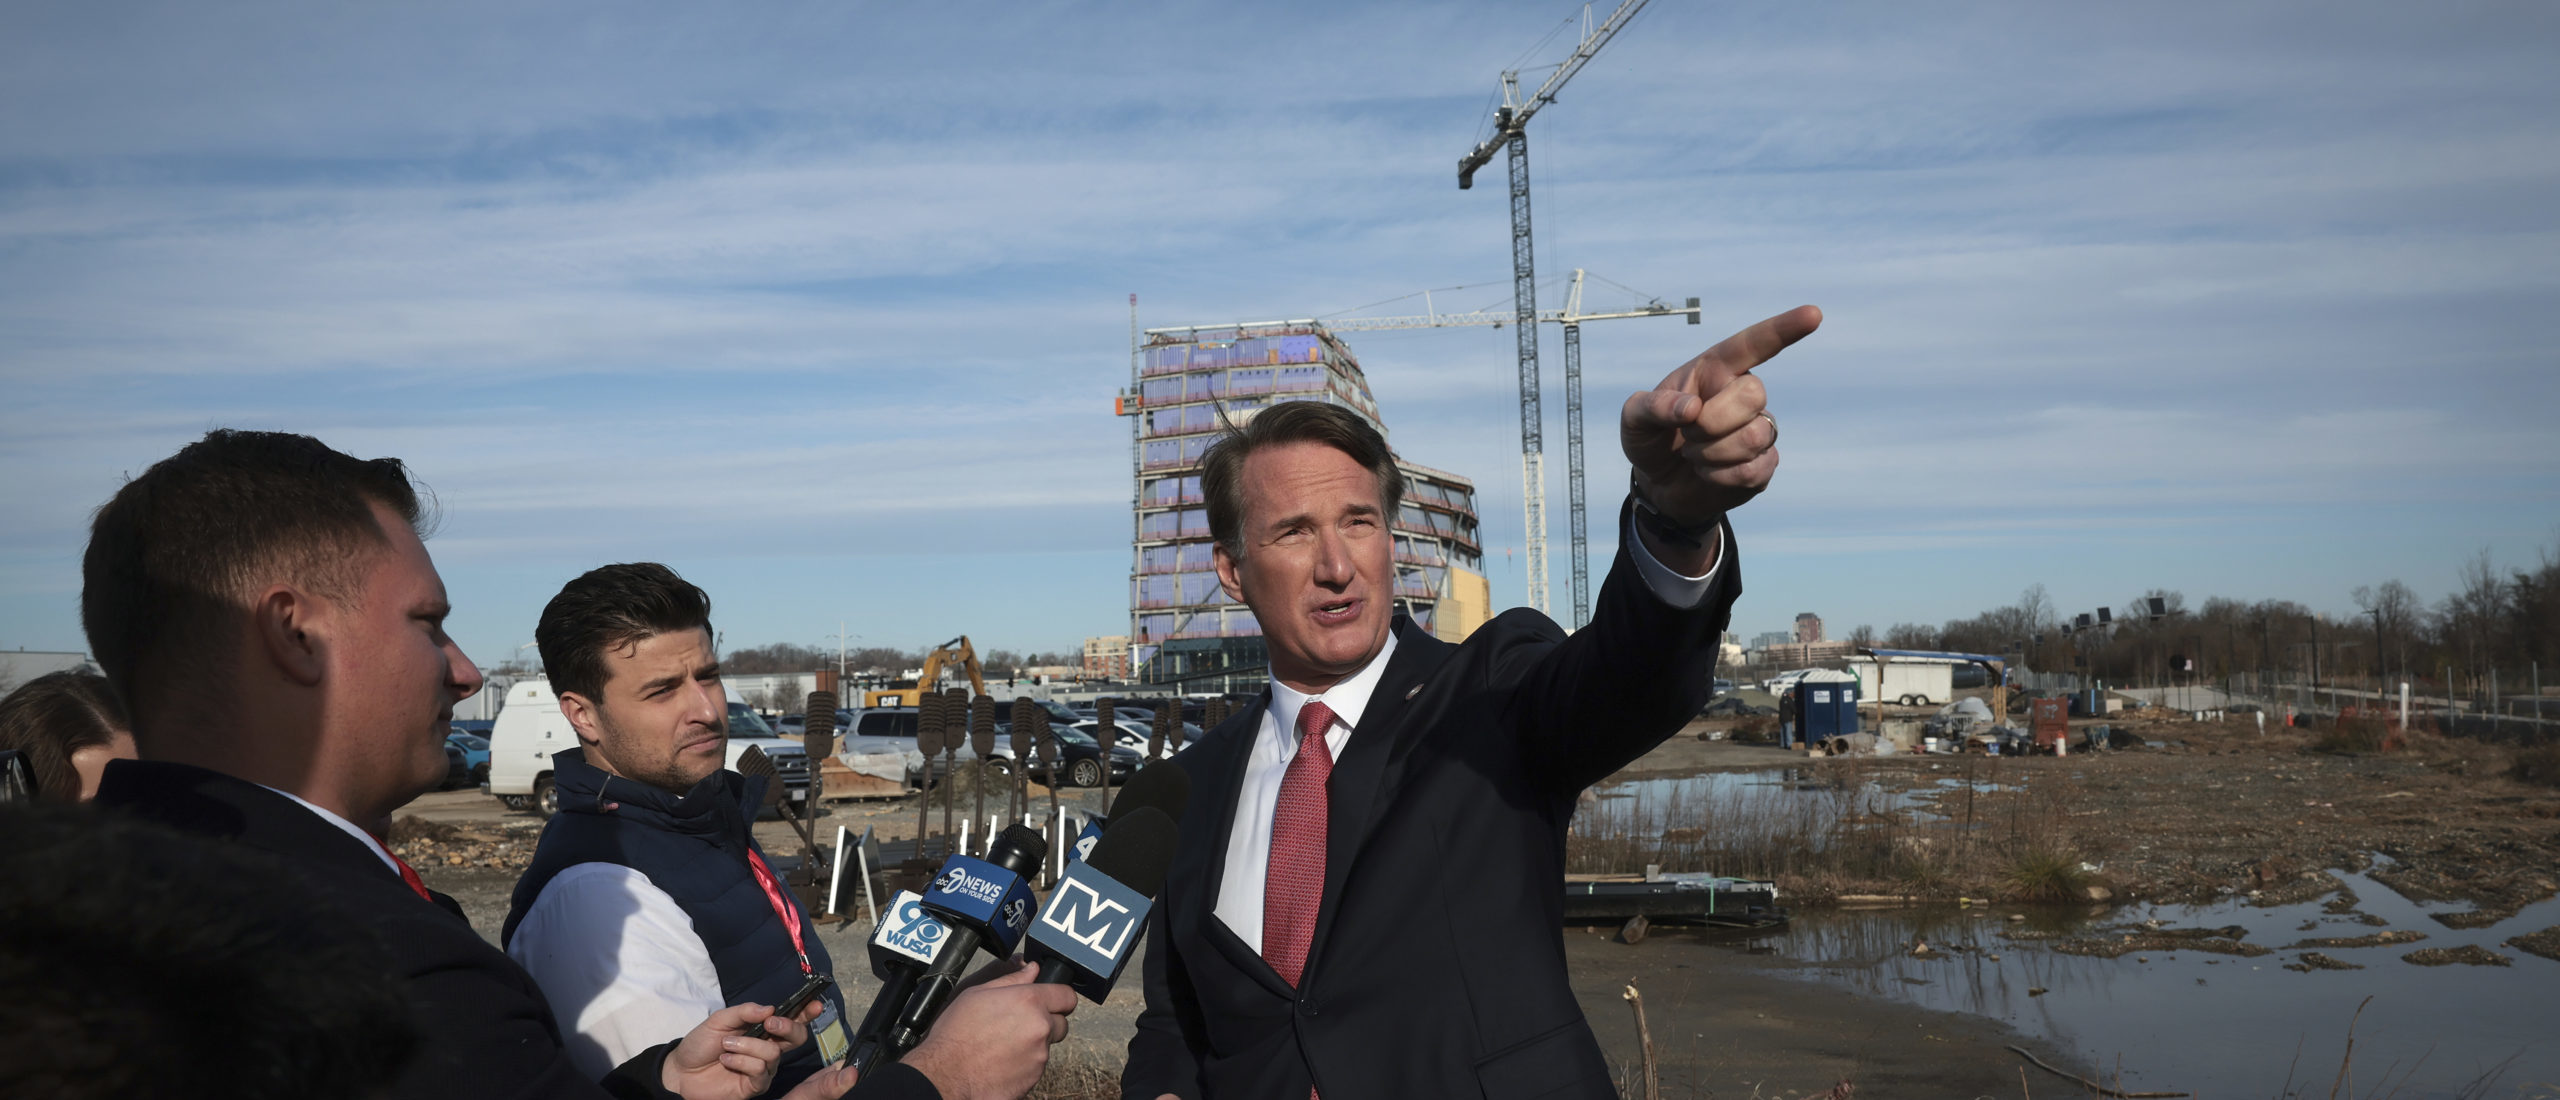 ALEXANDRIA, VIRGINIA - DECEMBER 13: Virginia Gov. Glenn Youngkin answers questions following the announcement of a new sports arena for the Washington Wizards NBA basketball team and Washington Capitals NHL hockey team, December 13, 2023 in Alexandria, Virginia. (Photo by Win McNamee/Getty Images)